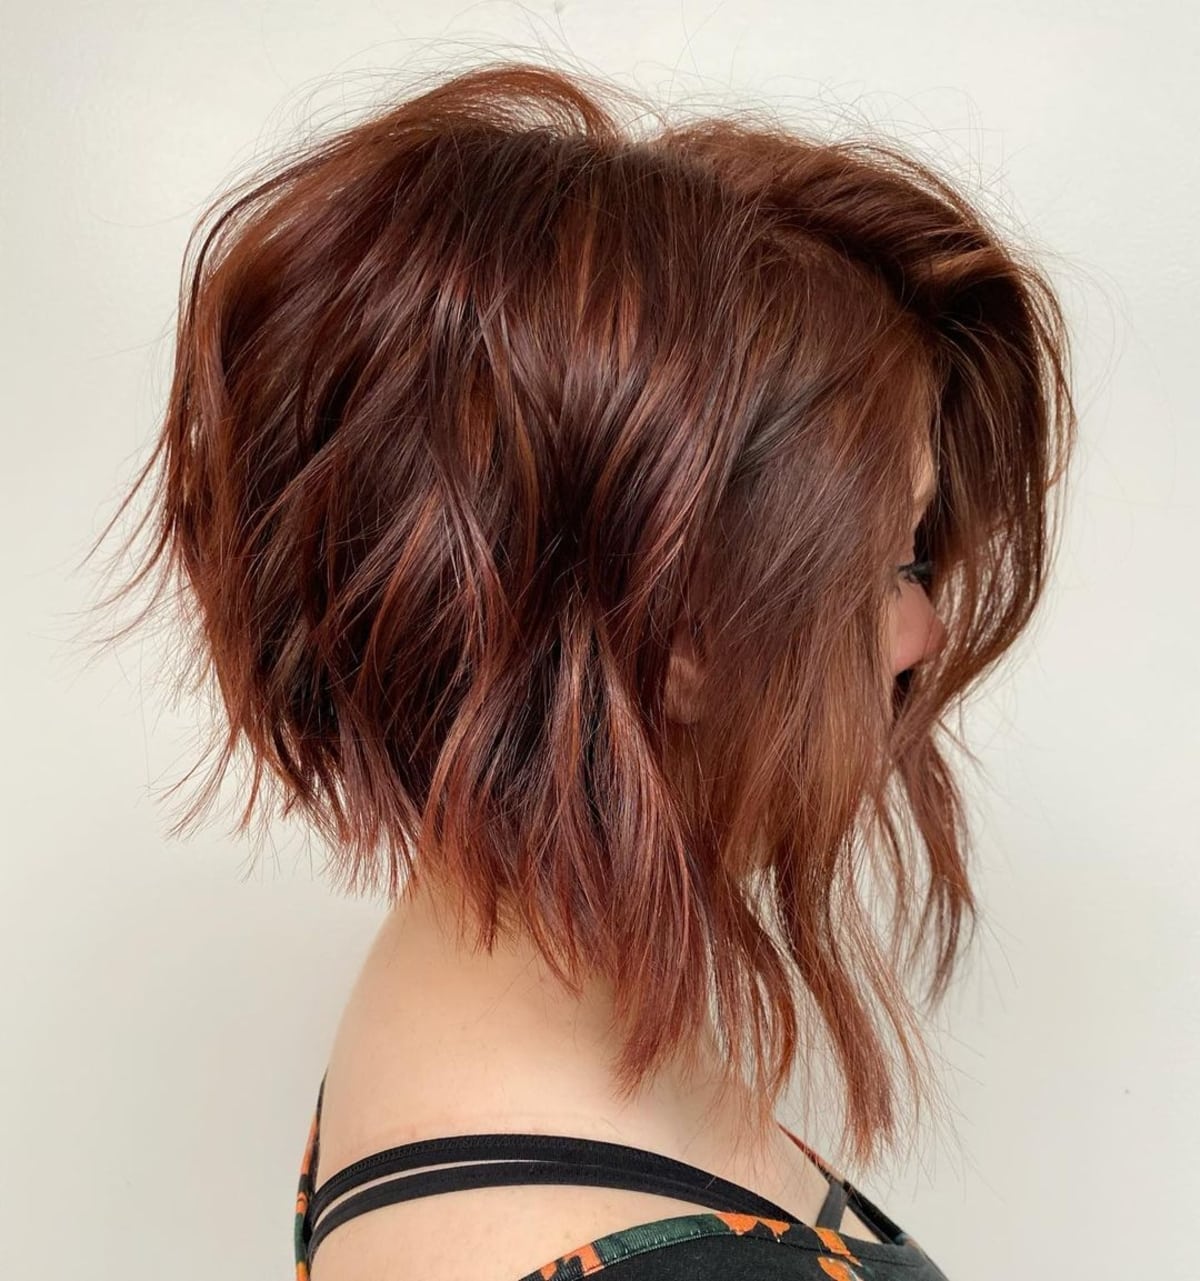 18 Most Popular Short Layered Bob Haircuts That Are Easy to Style